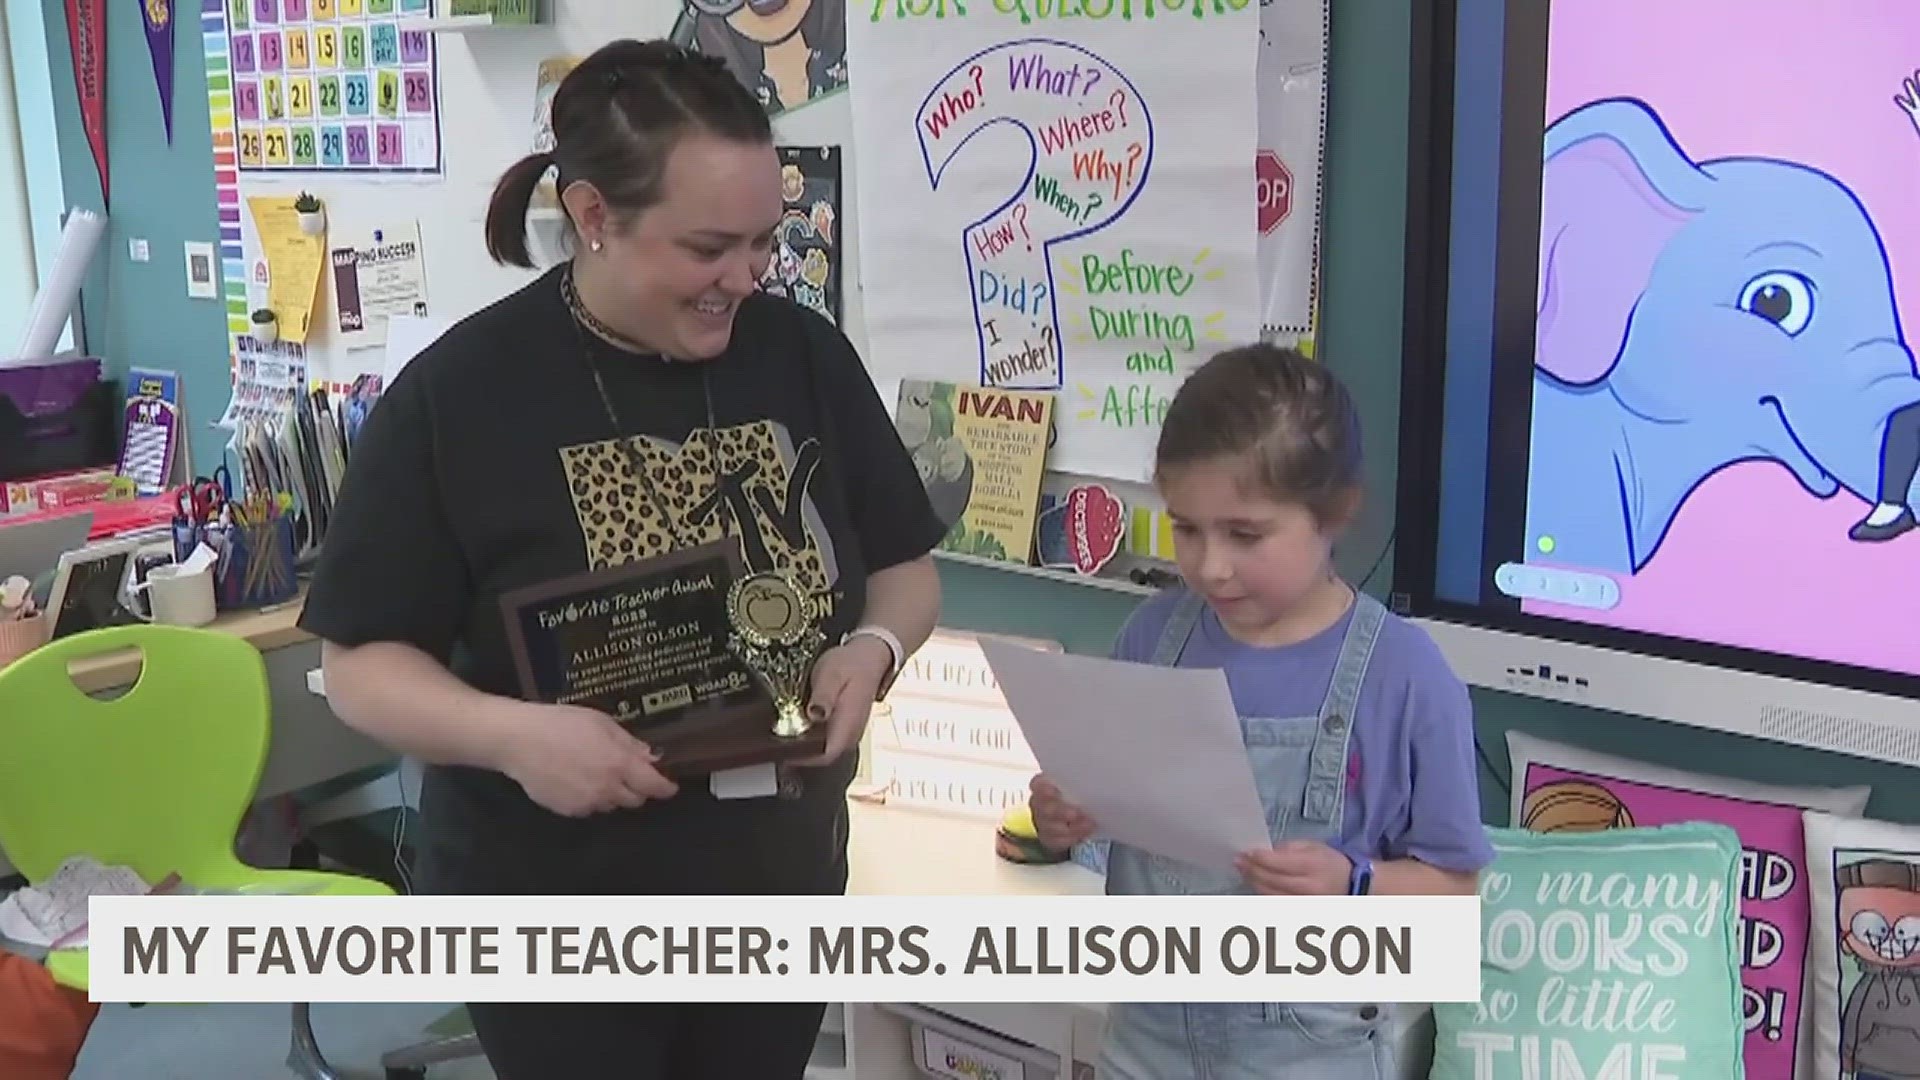 Mrs. Allison Olson of Hamilton Elementary School in Moline wins a 2023 My Favorite Teacher award after being nominated by a student who loves her fun classroom.